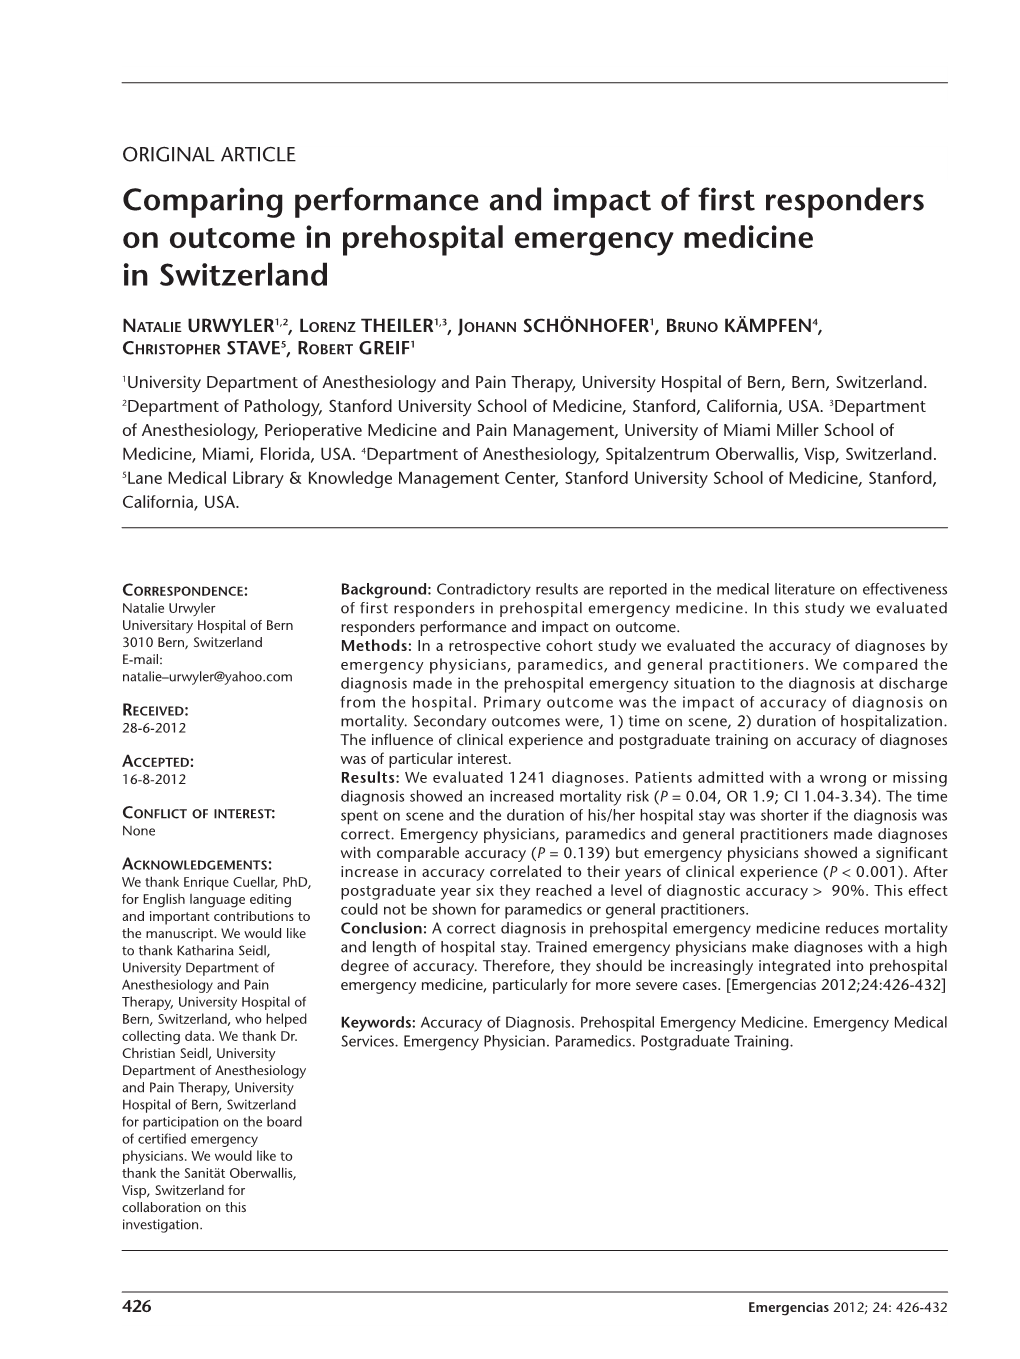 Comparing Performance and Impact of First Responders on Outcome in Prehospital Emergency Medicine in Switzerland